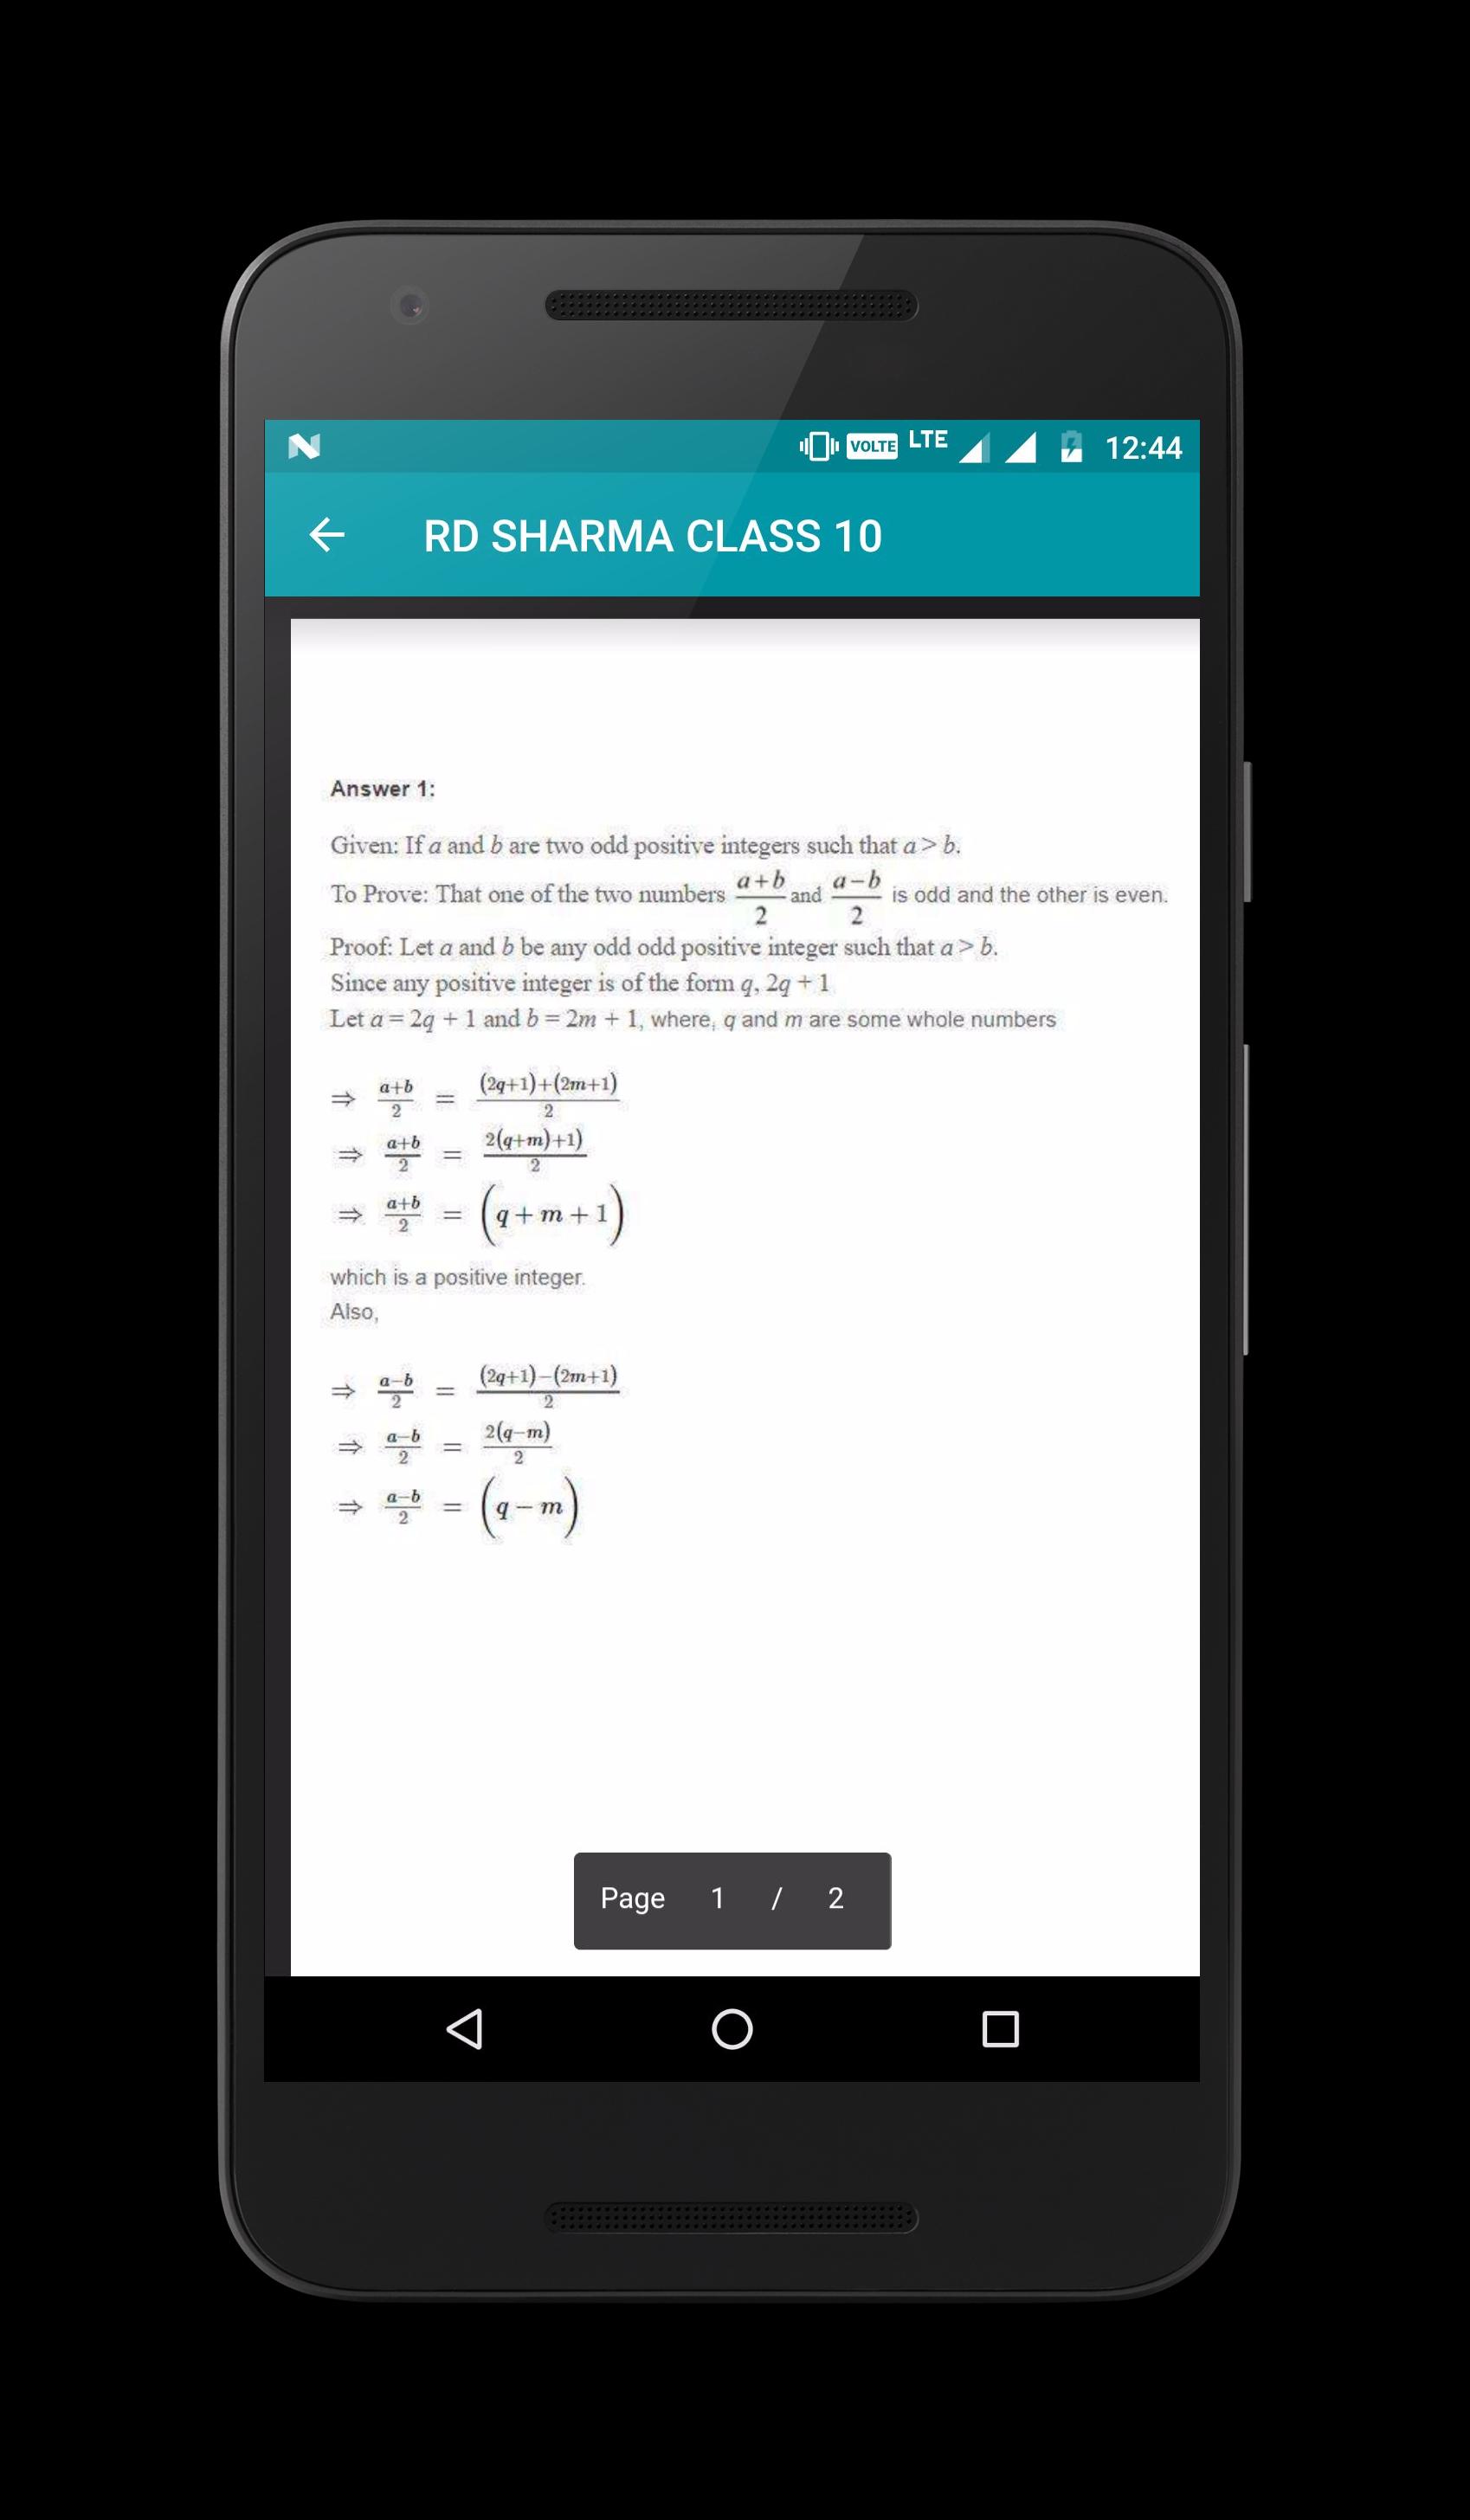 RD Sharma Class 10 Maths Solution for Android - APK Download